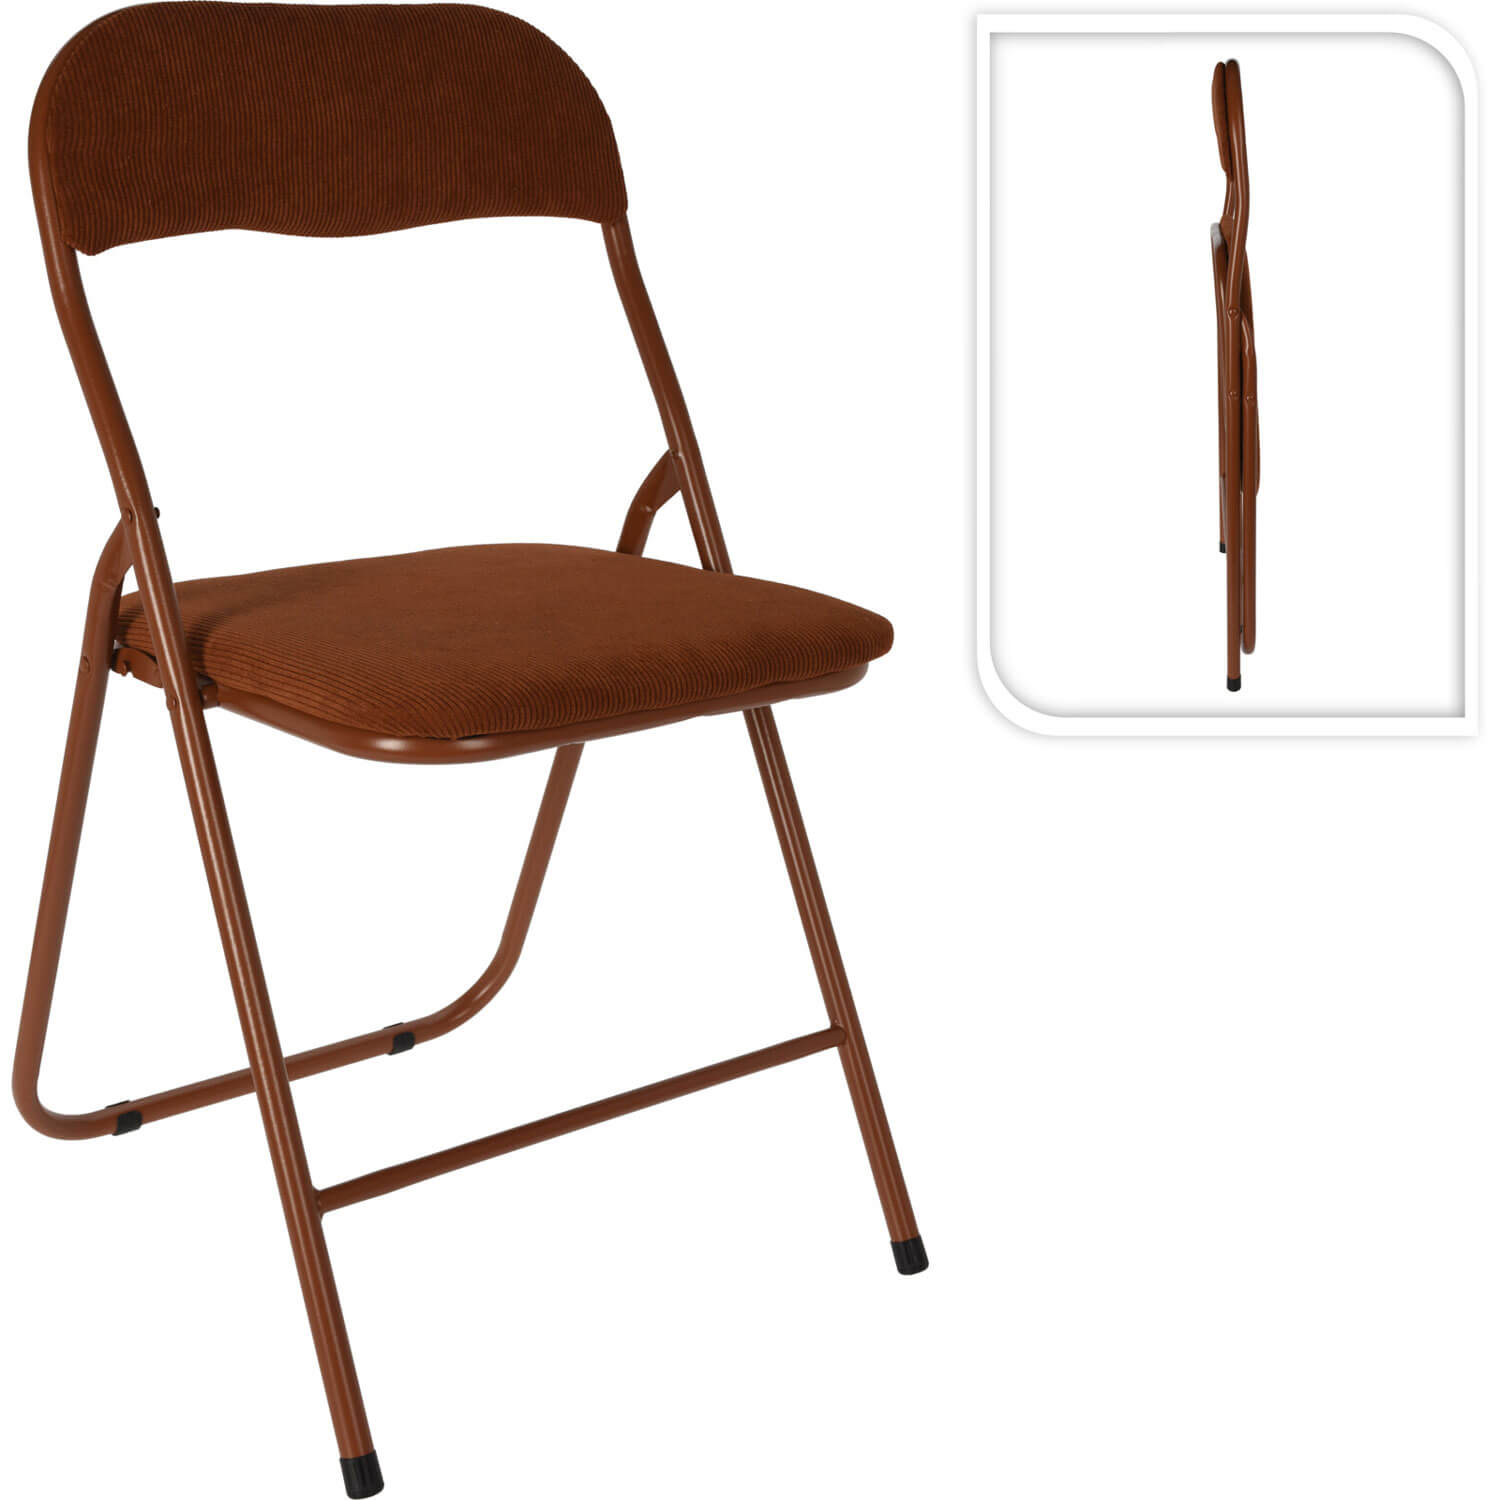 Shaws Department Stores Folding Chair Ribcord Brown - Blue 1 Shaws Department Stores